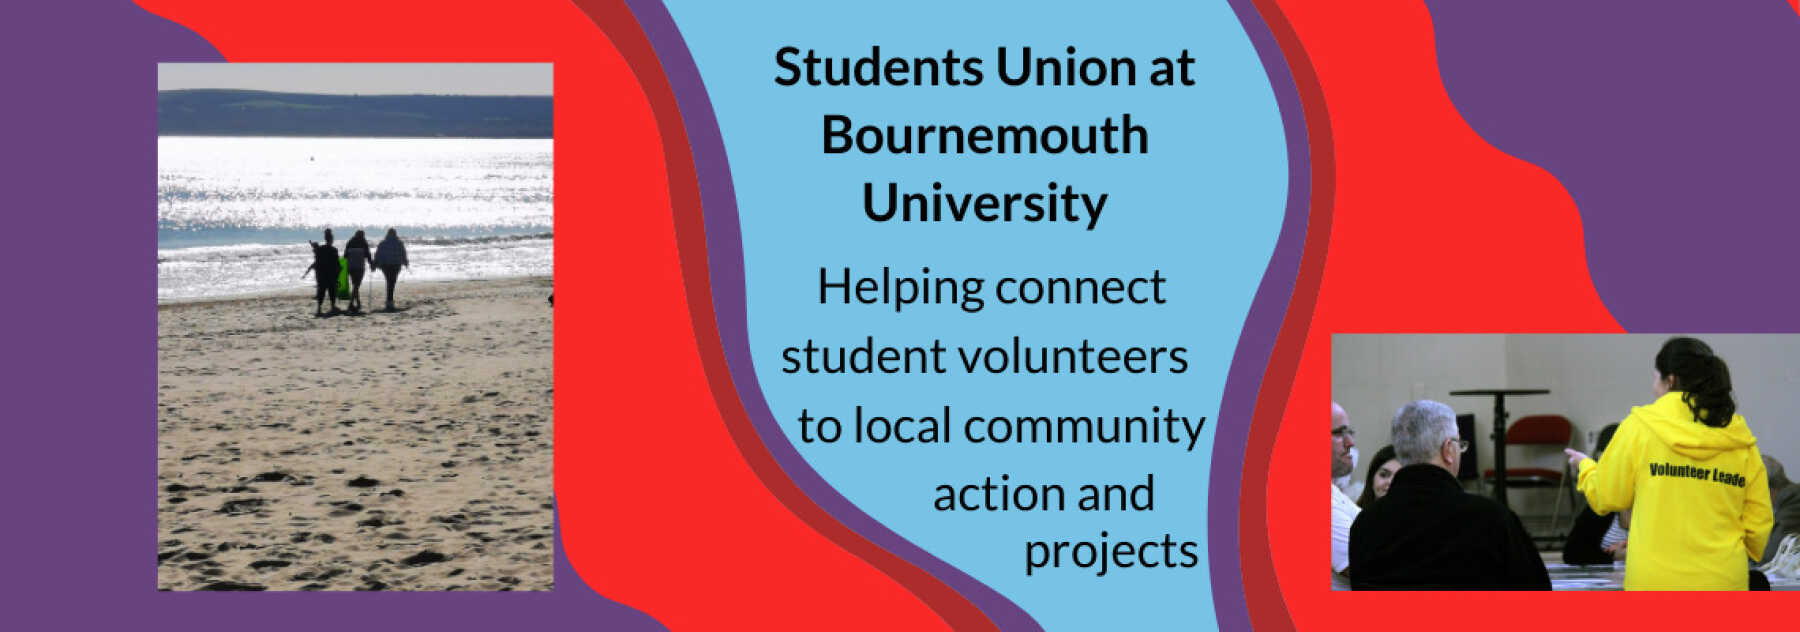 Featured Image for Students Union at Bournemouth University